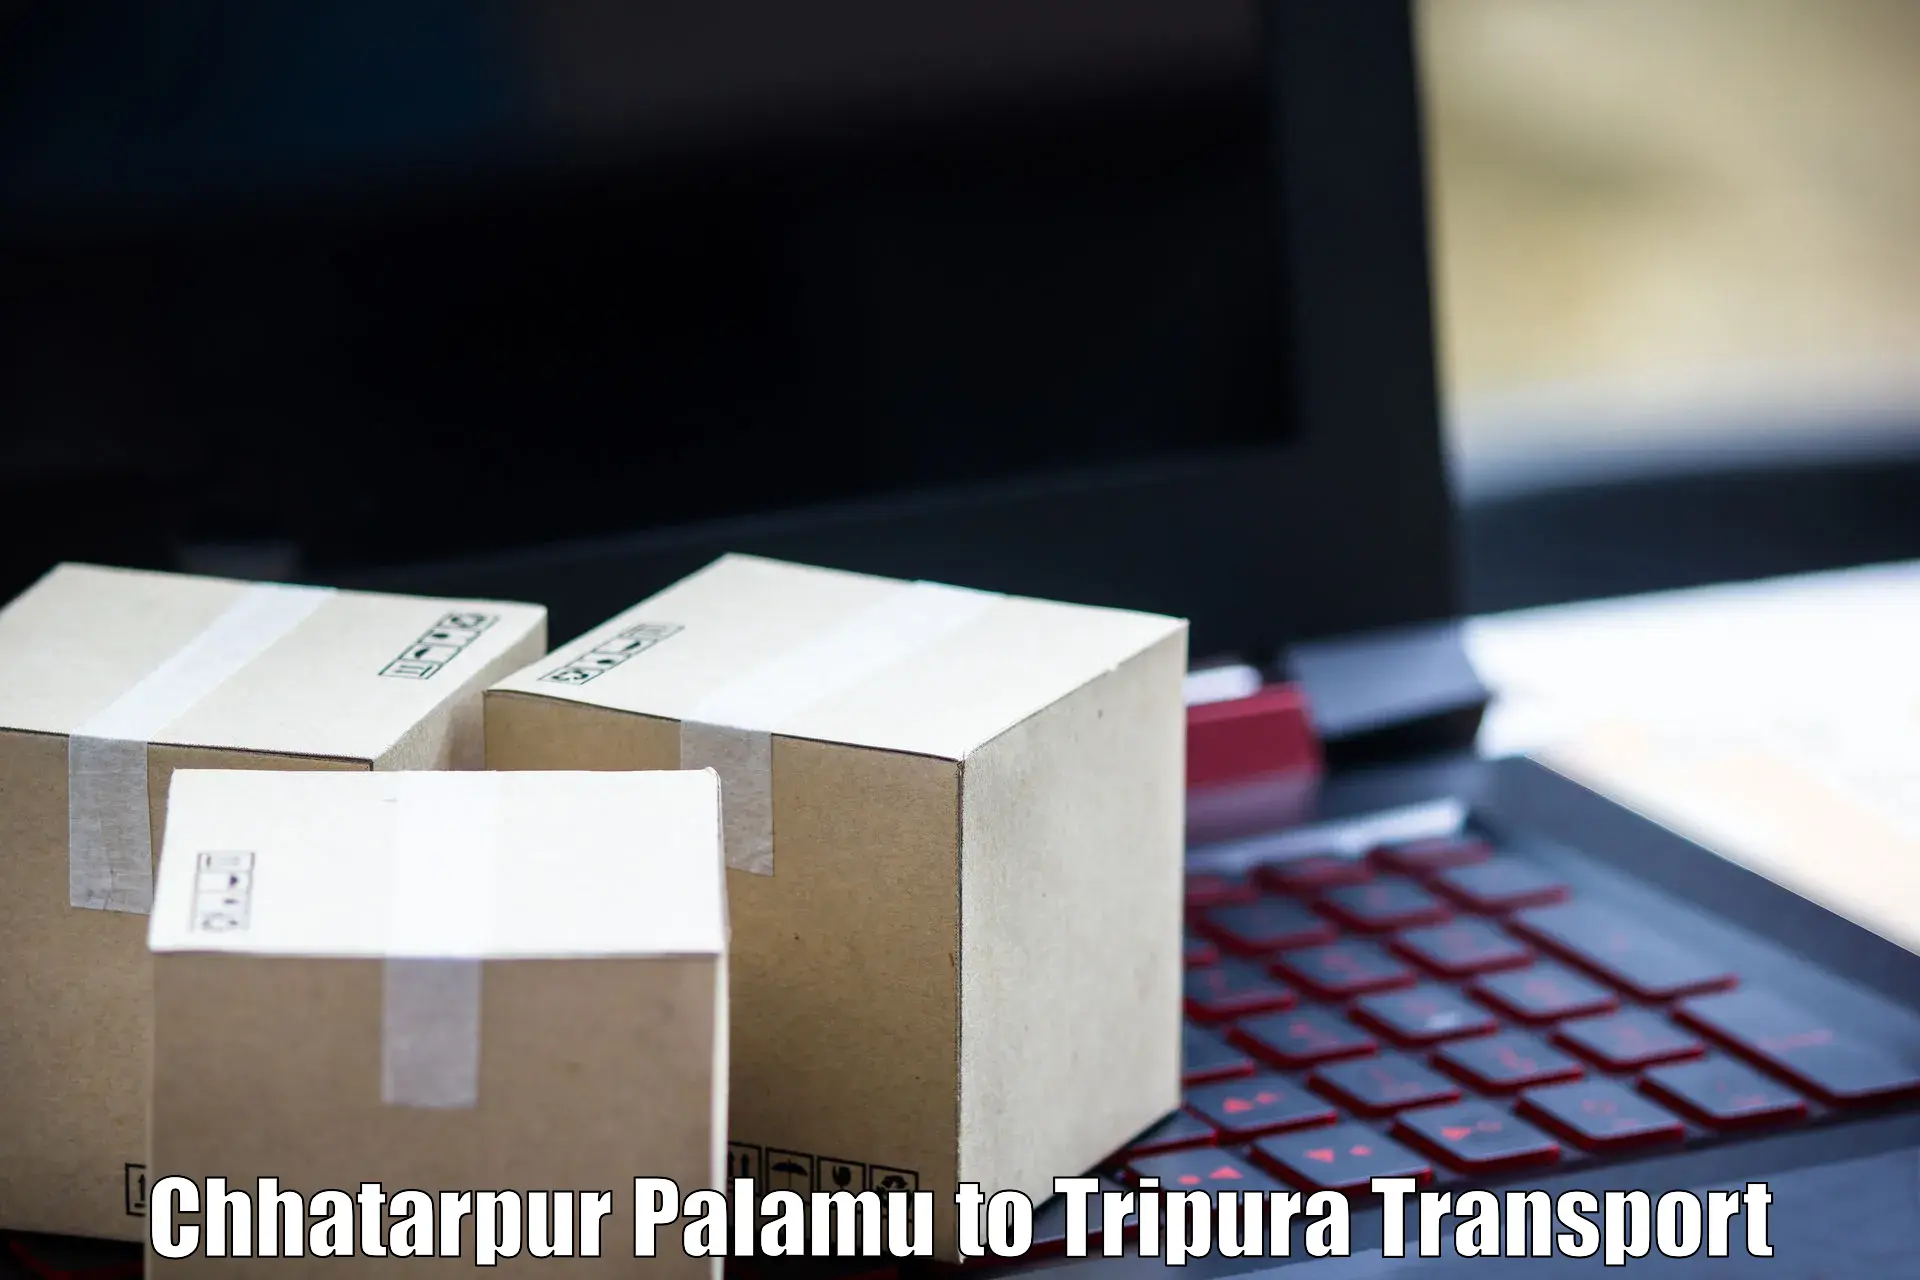 Package delivery services Chhatarpur Palamu to Udaipur Tripura